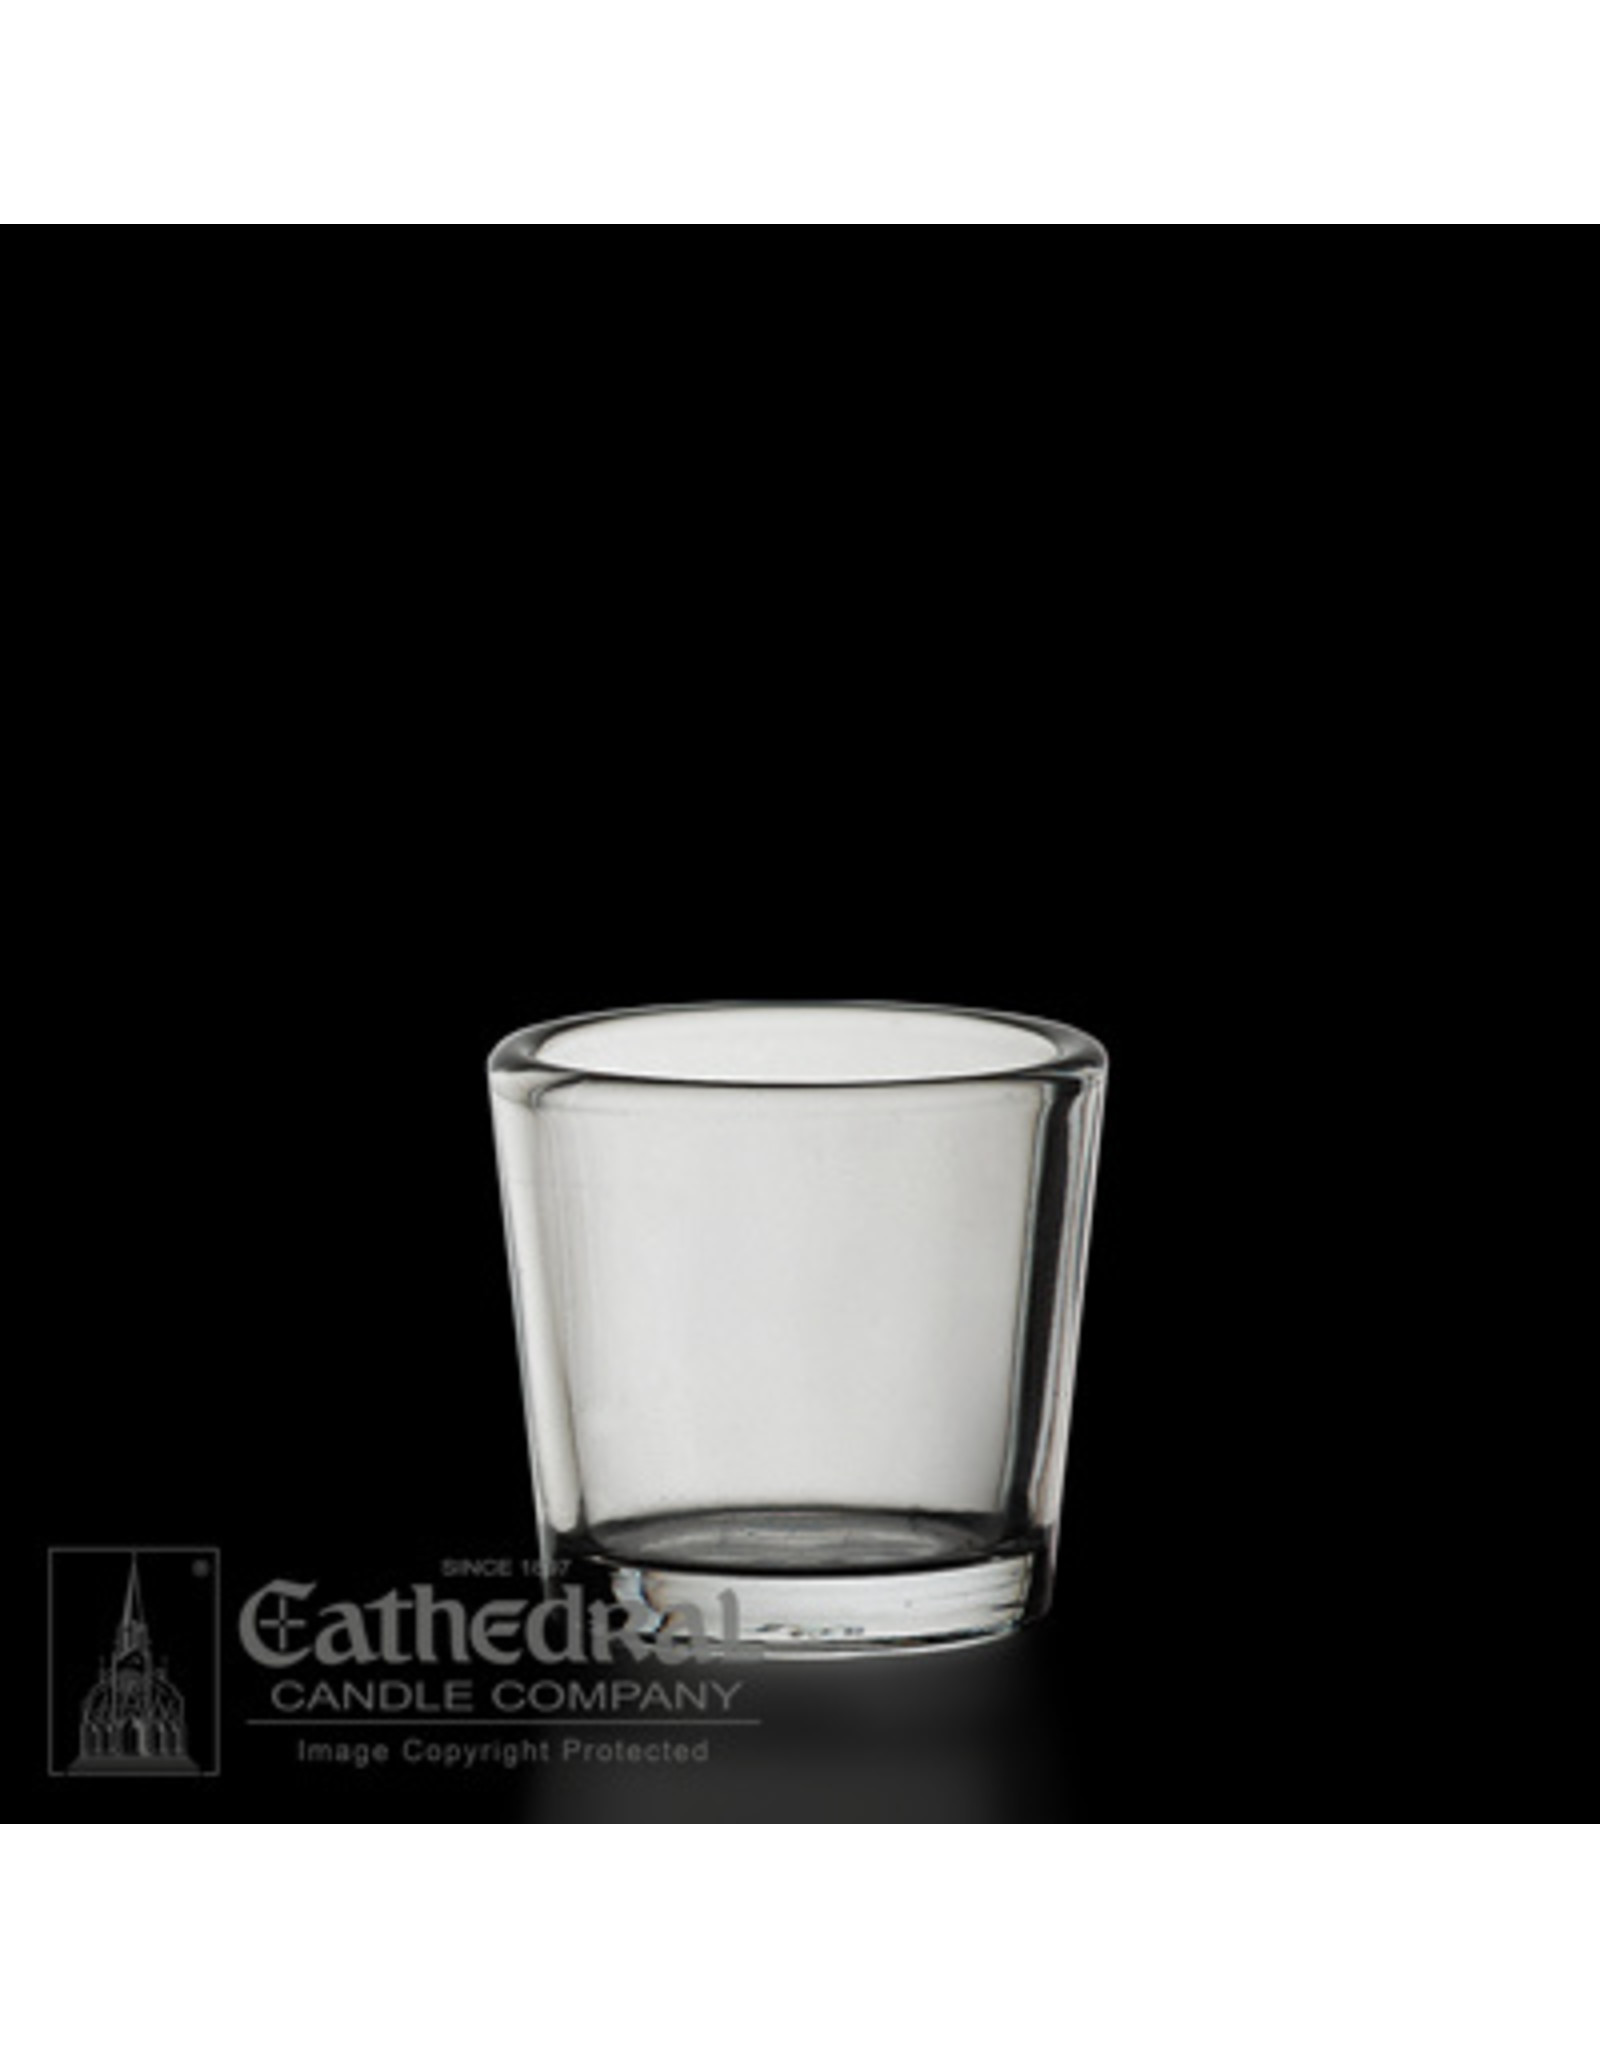 Cathedral Candle Votive Light Glasses - Crystal, 2-10 Hour (12)